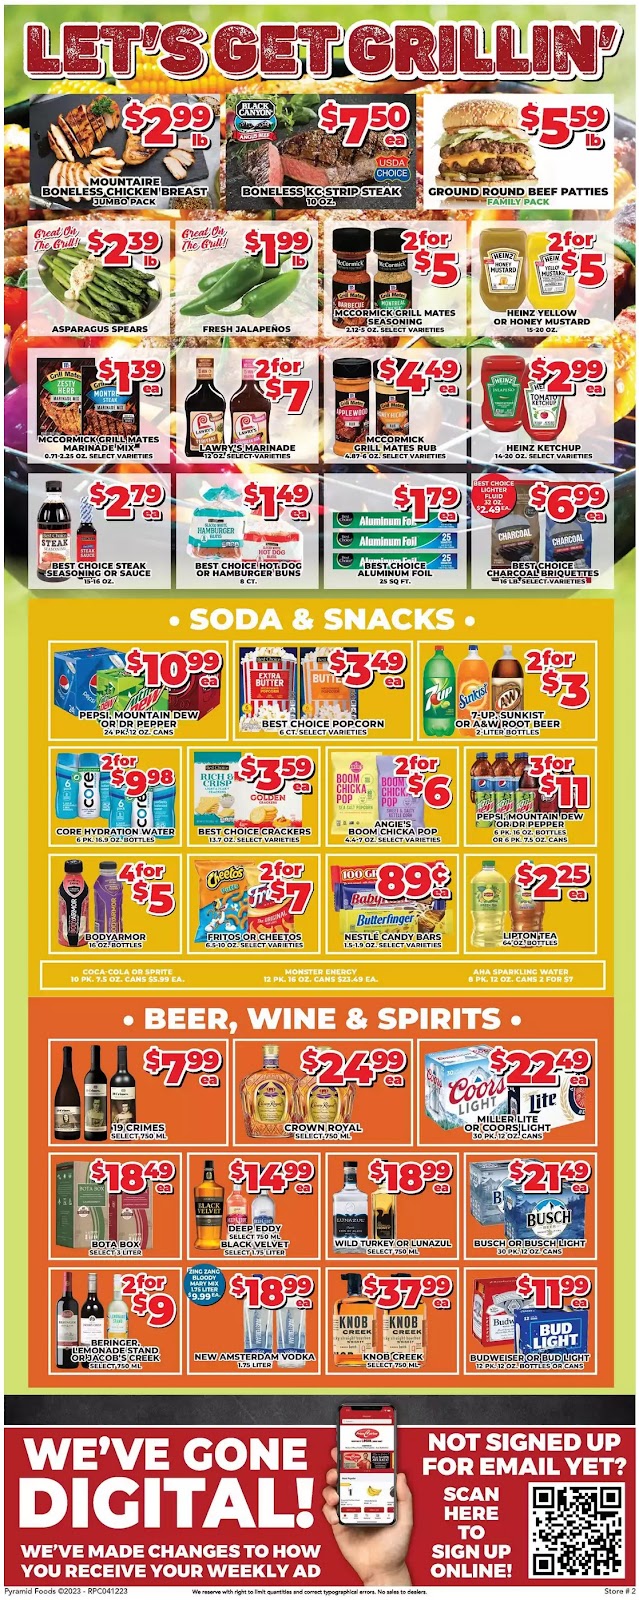 Price Cutter Weekly Ad - 4